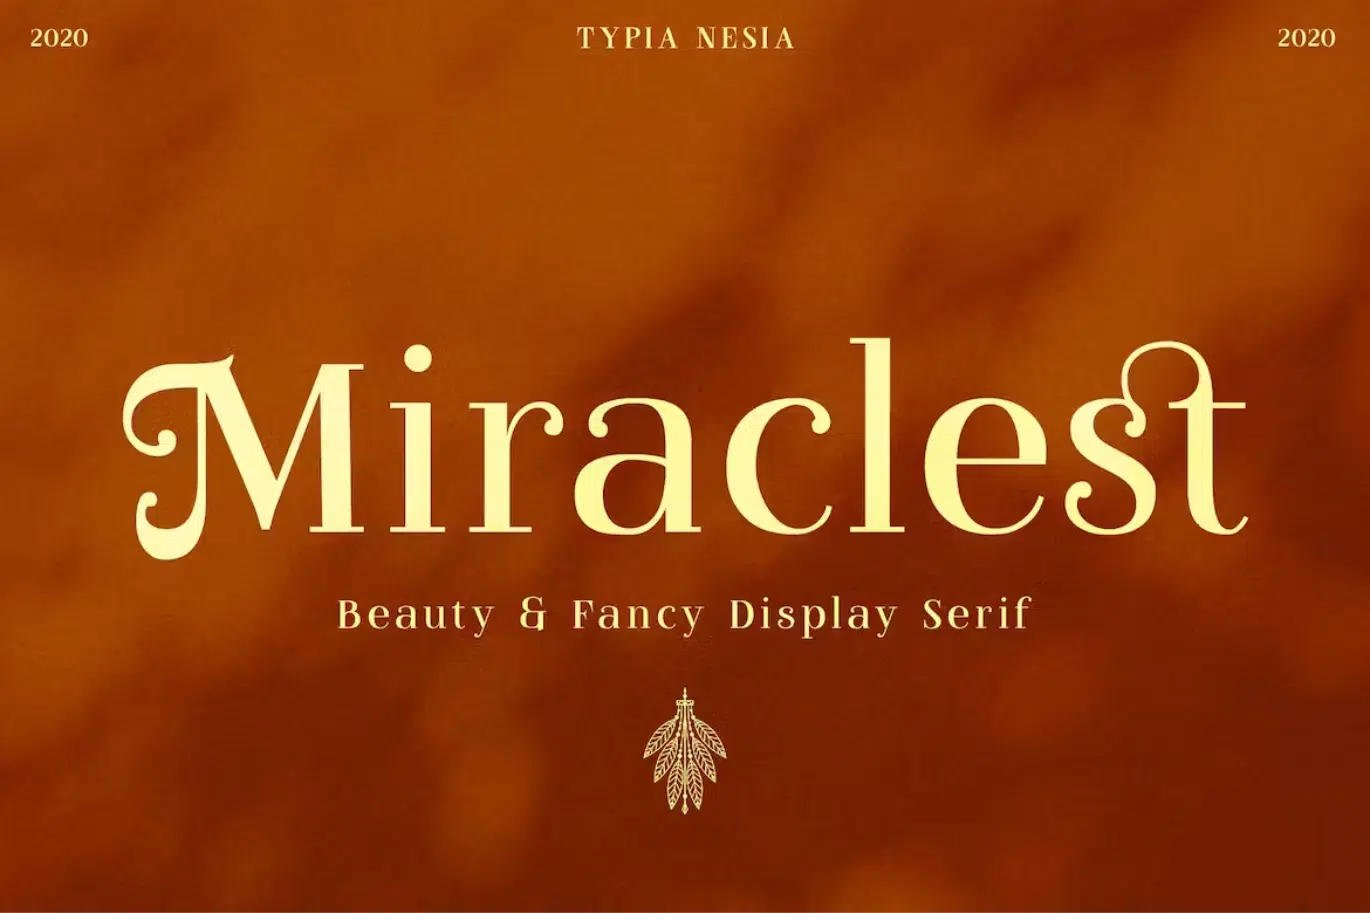 Miraclest Font Similar To Didot